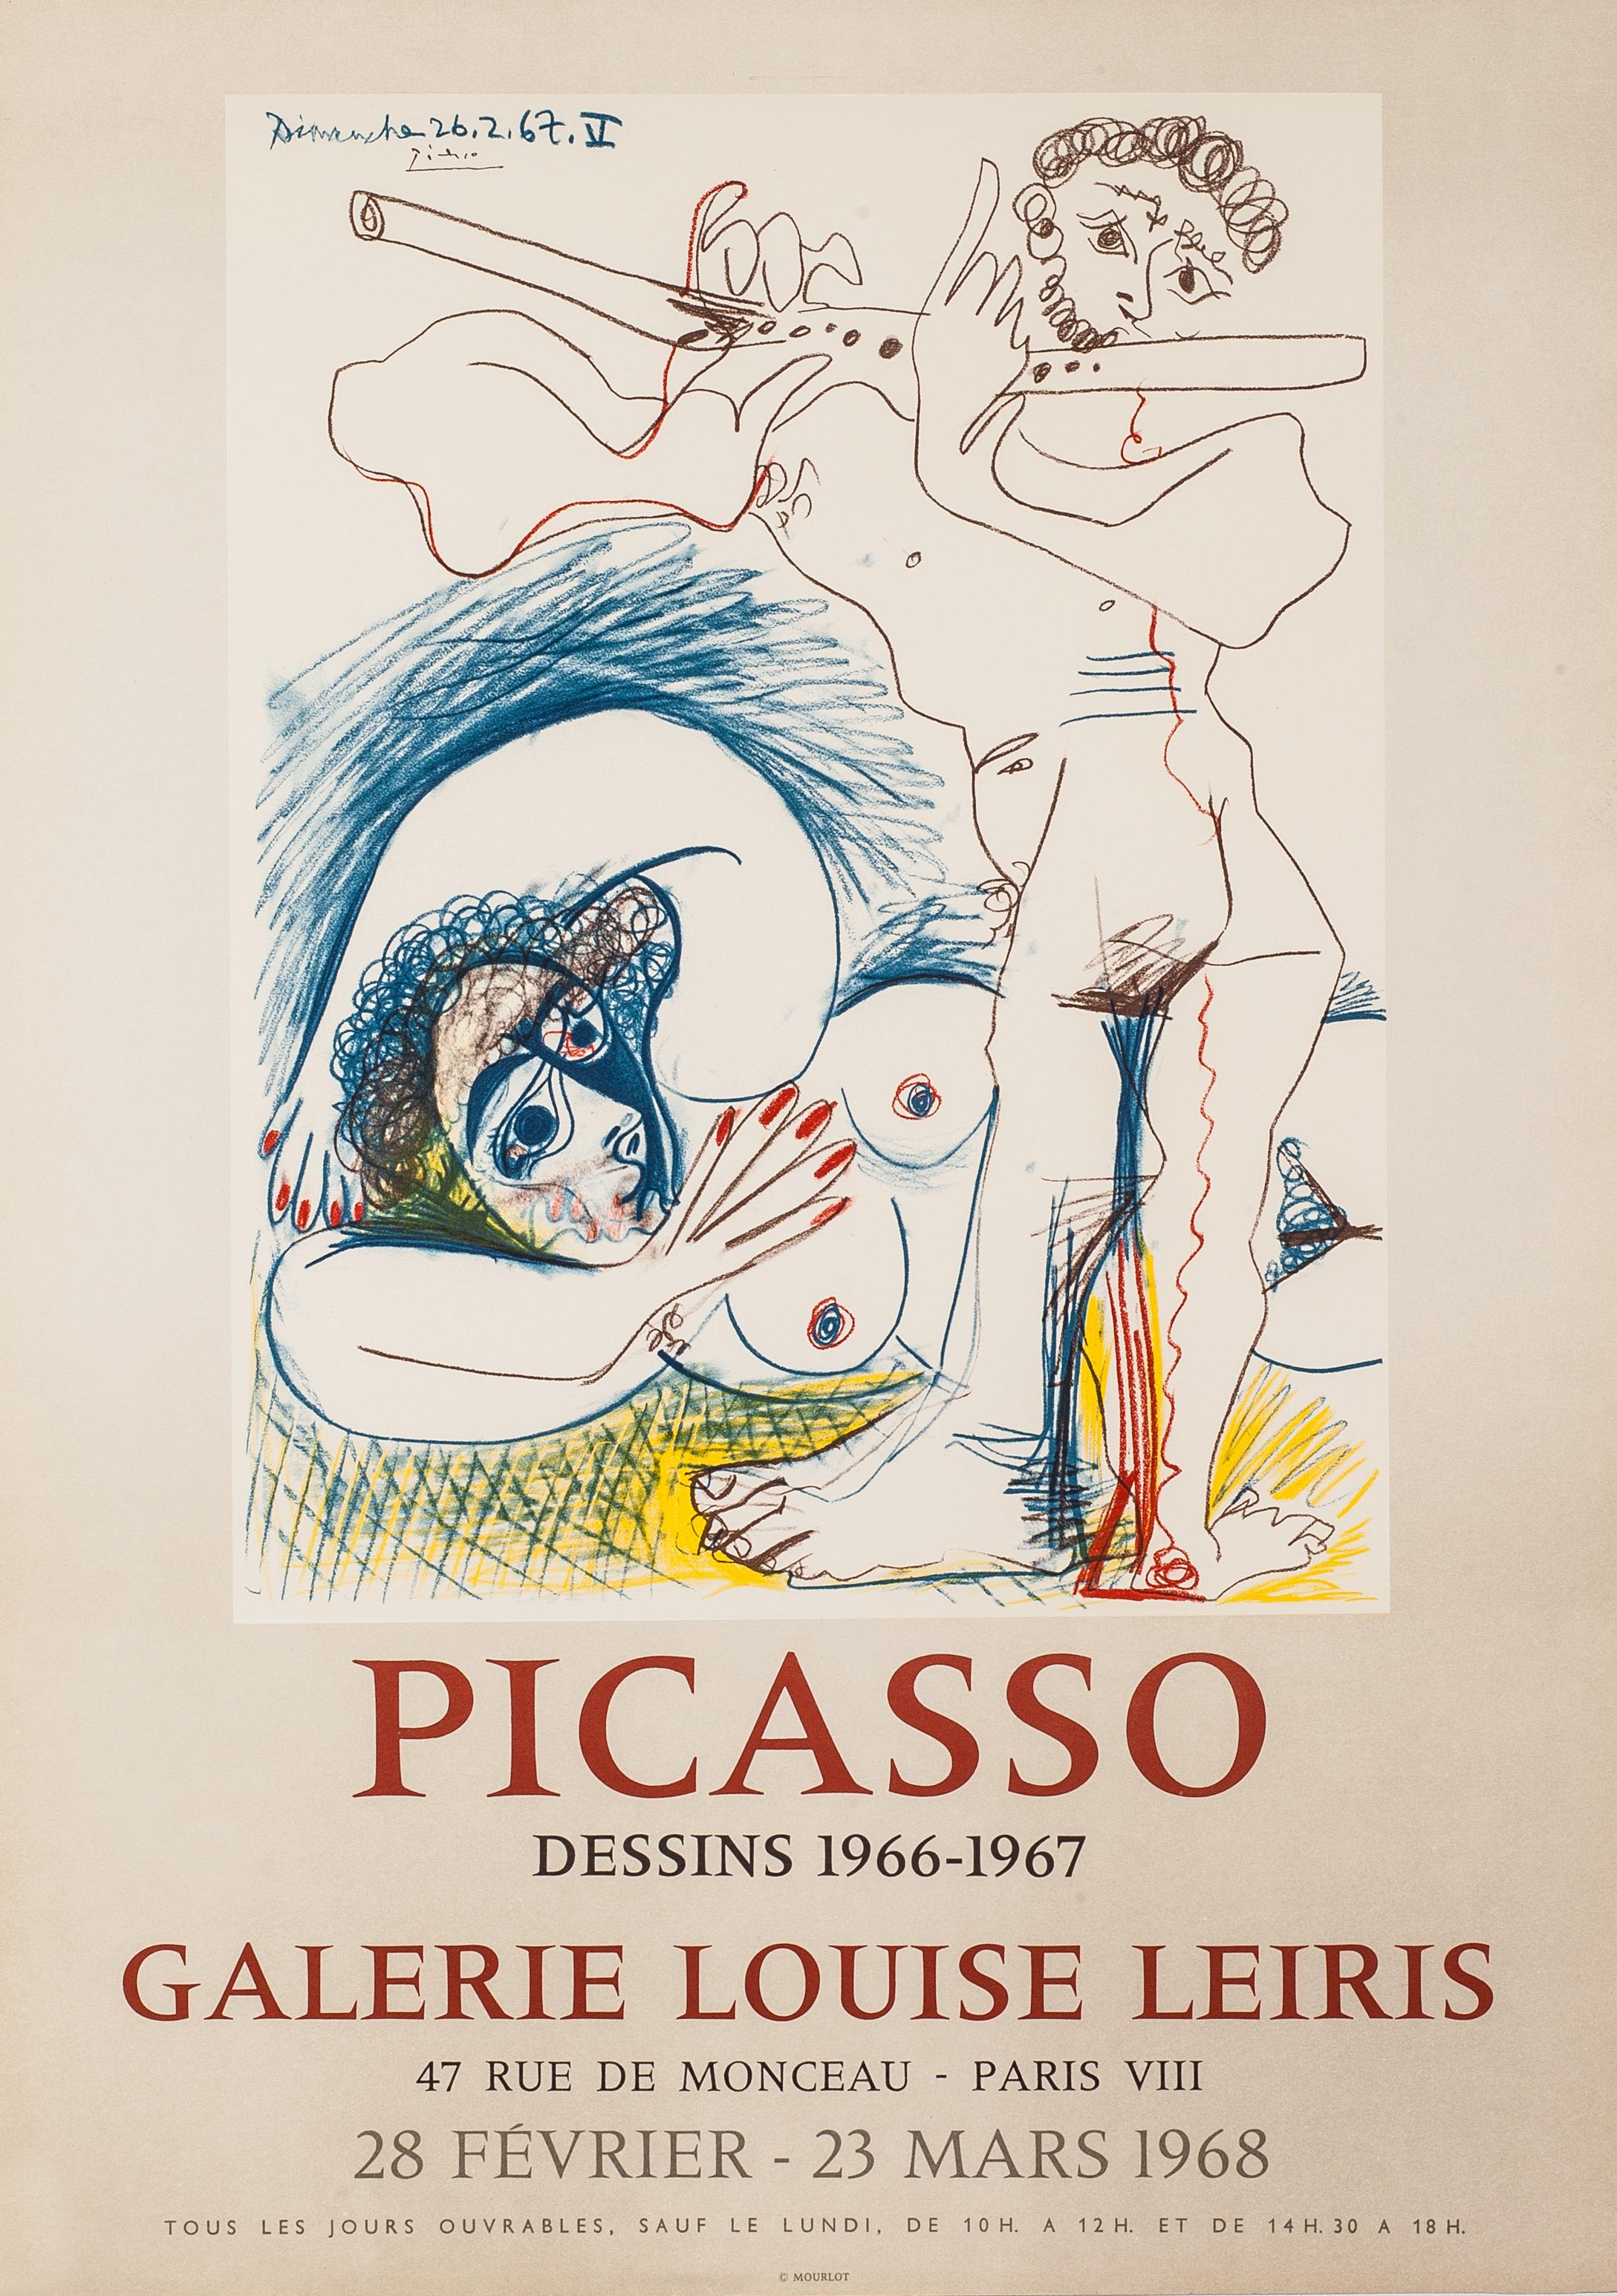 (after) Pablo Picasso Abstract Print - Dessins 1966-1967, Galerie Louise Leiris by Picasso